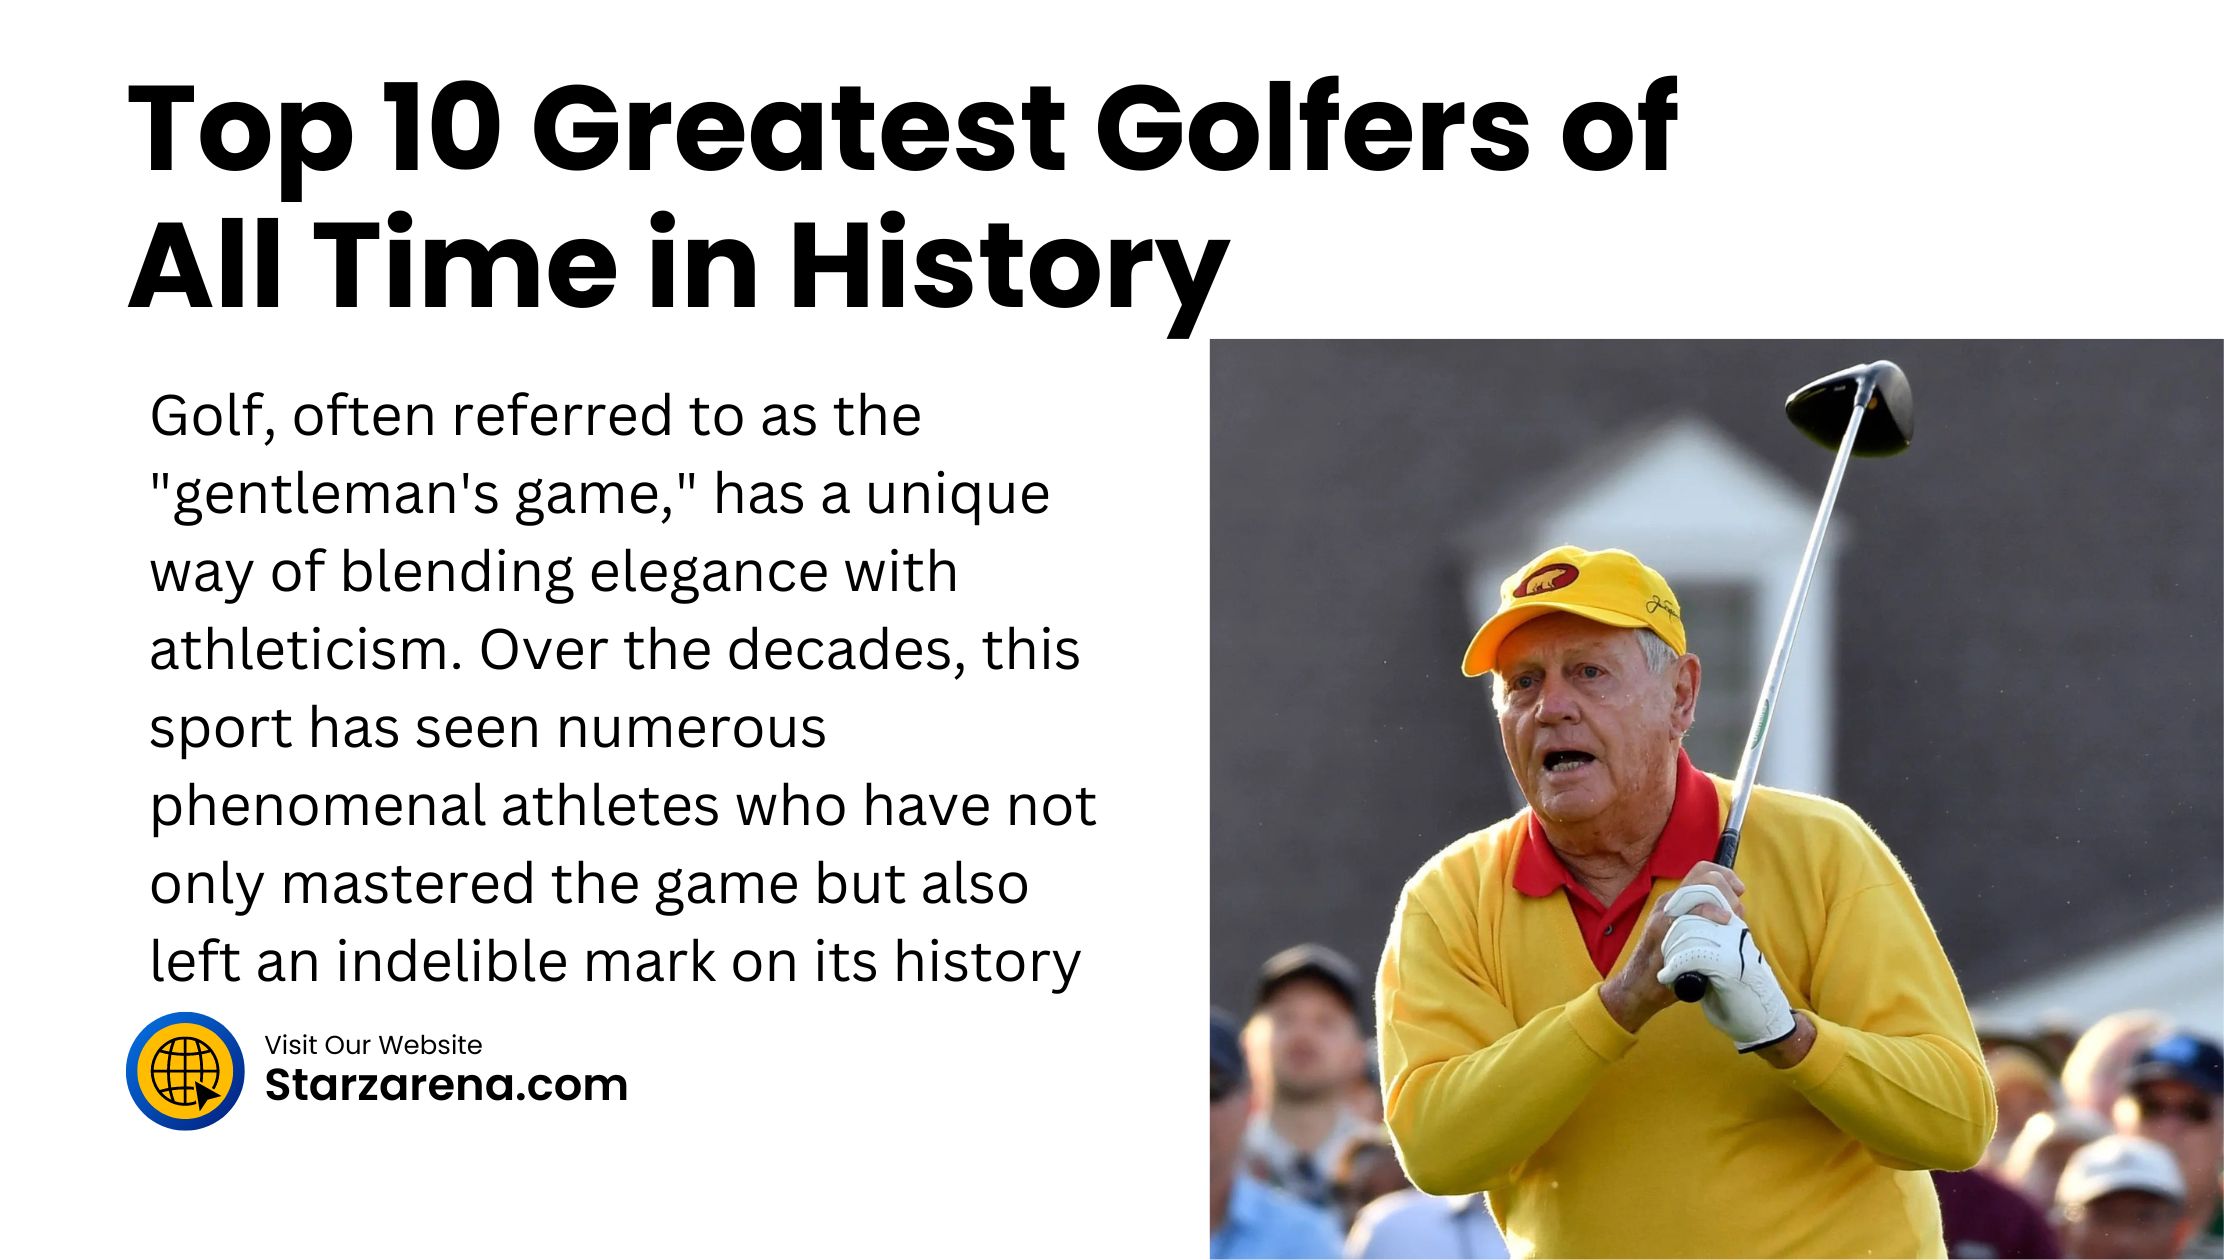 Greatest Golfers of All Time in History